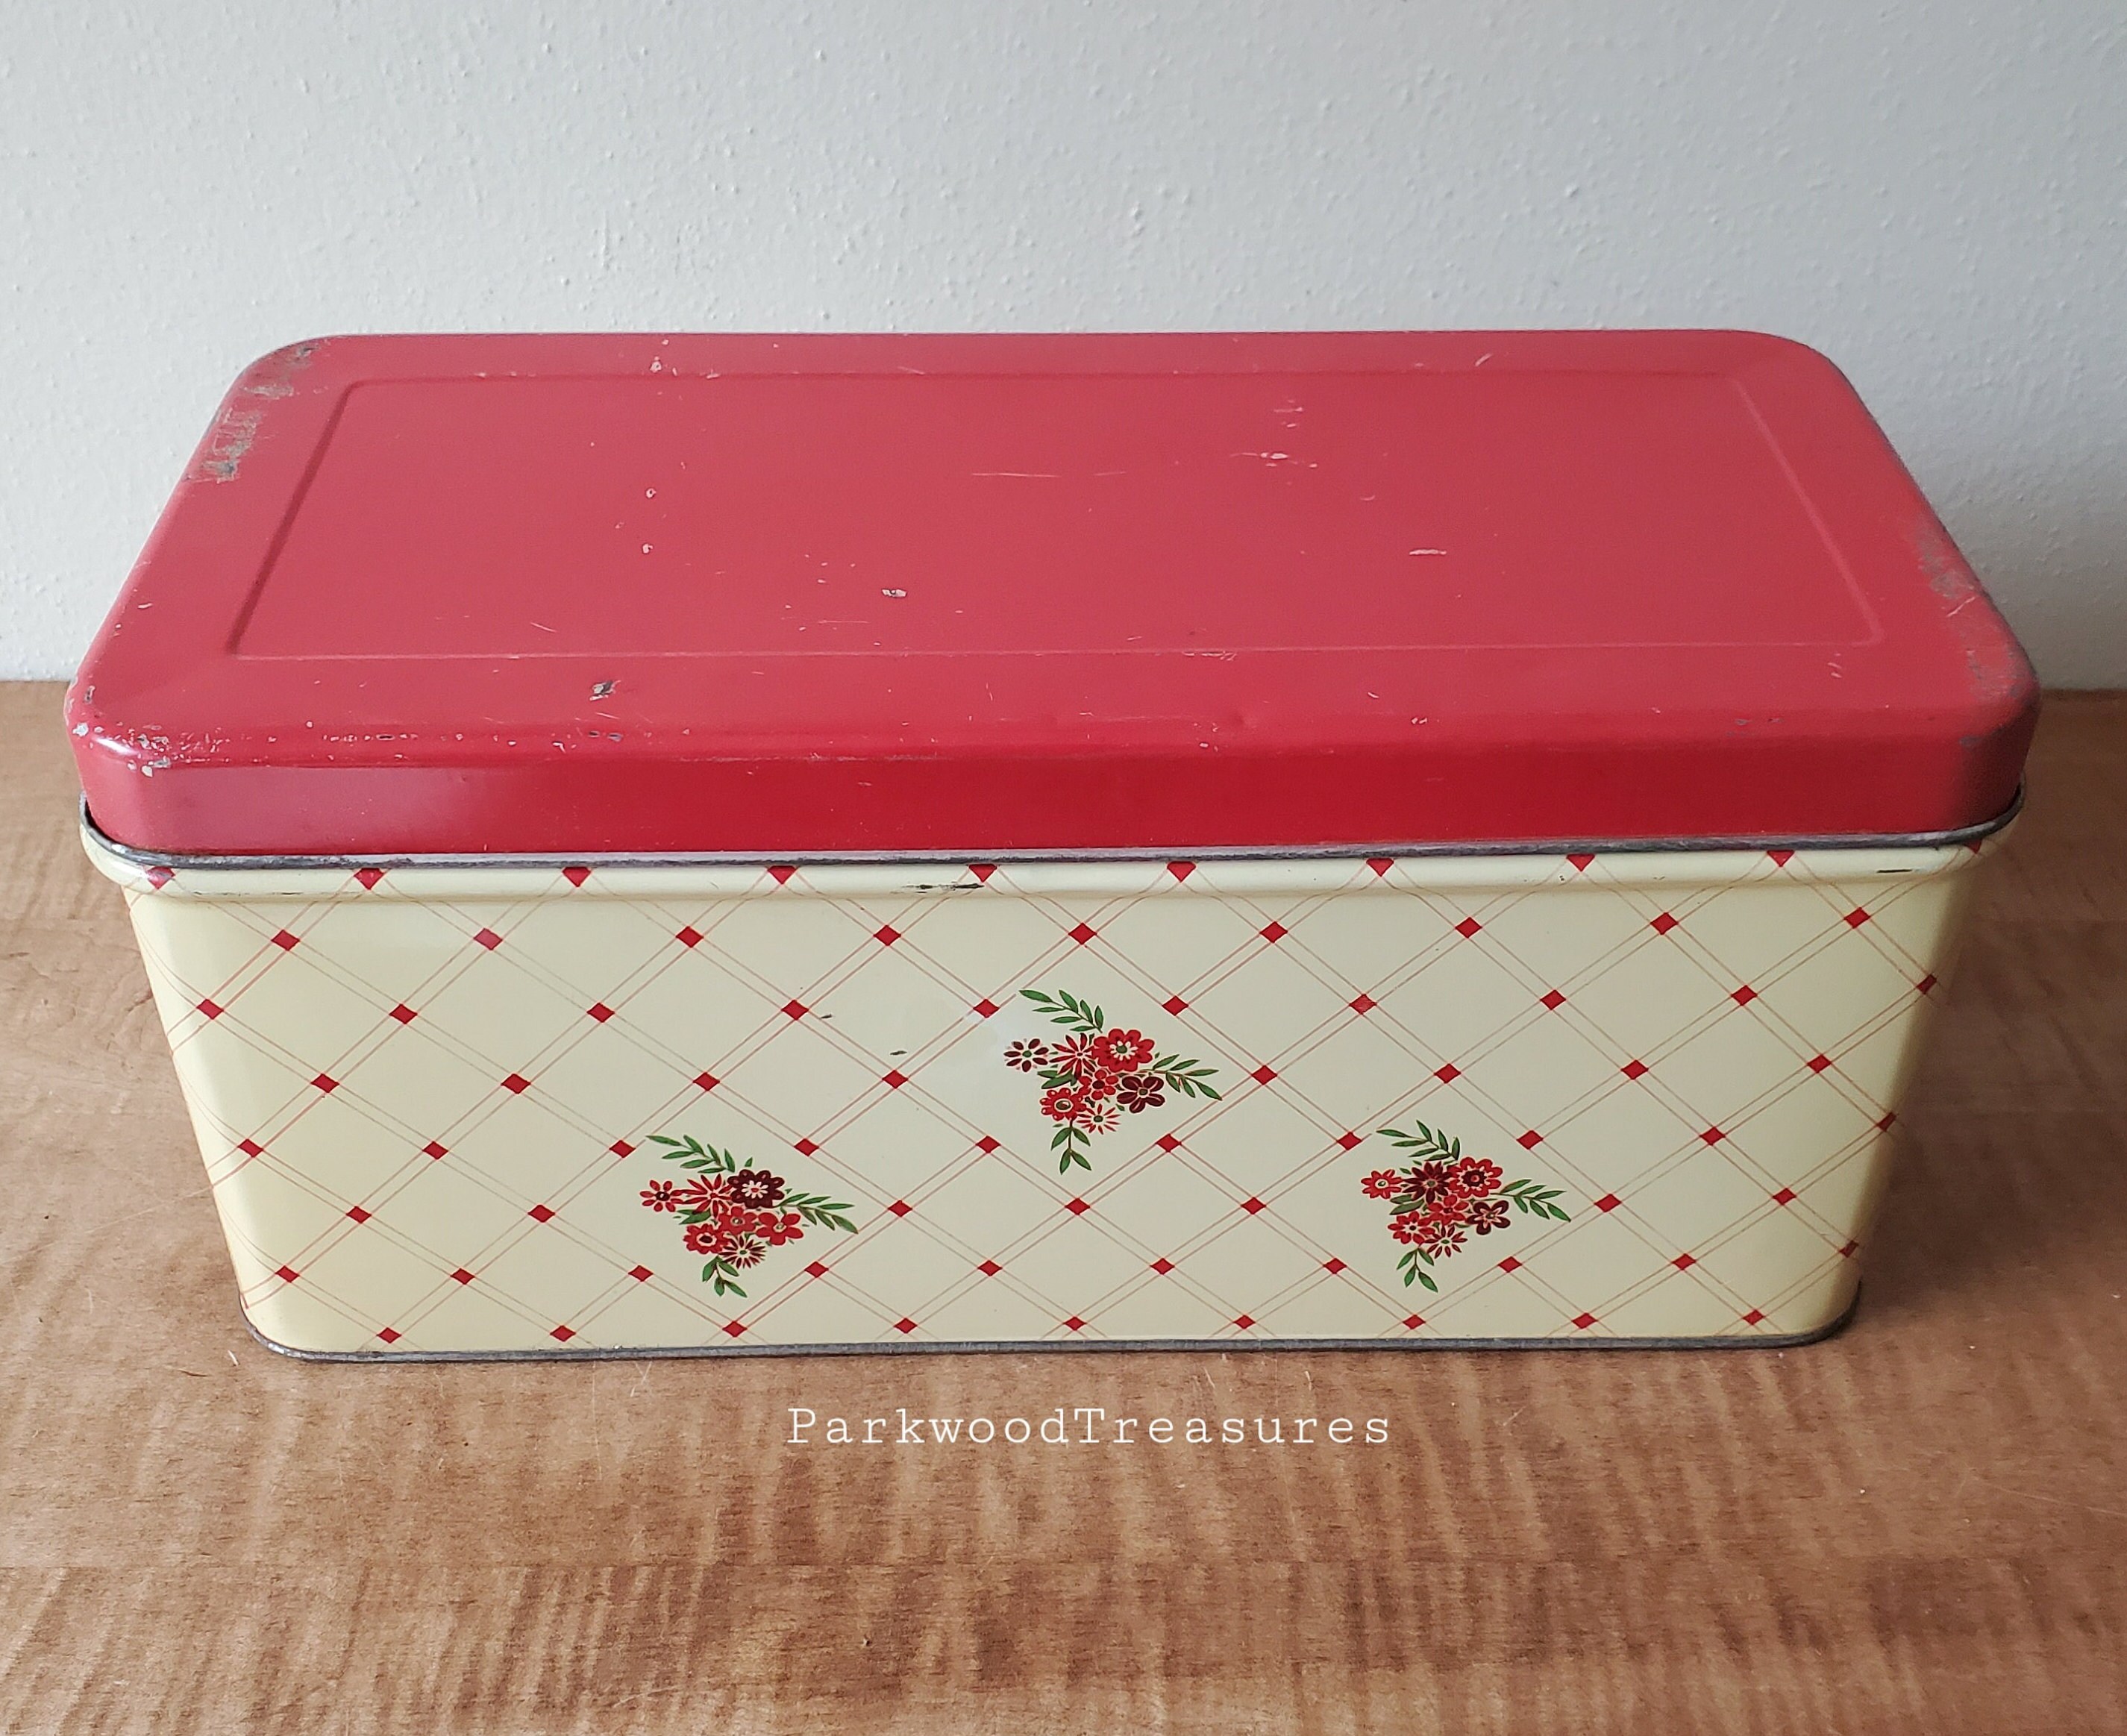 Bread Bin Extras-Large Plastic Bread Boxes for Kitchen Vintage